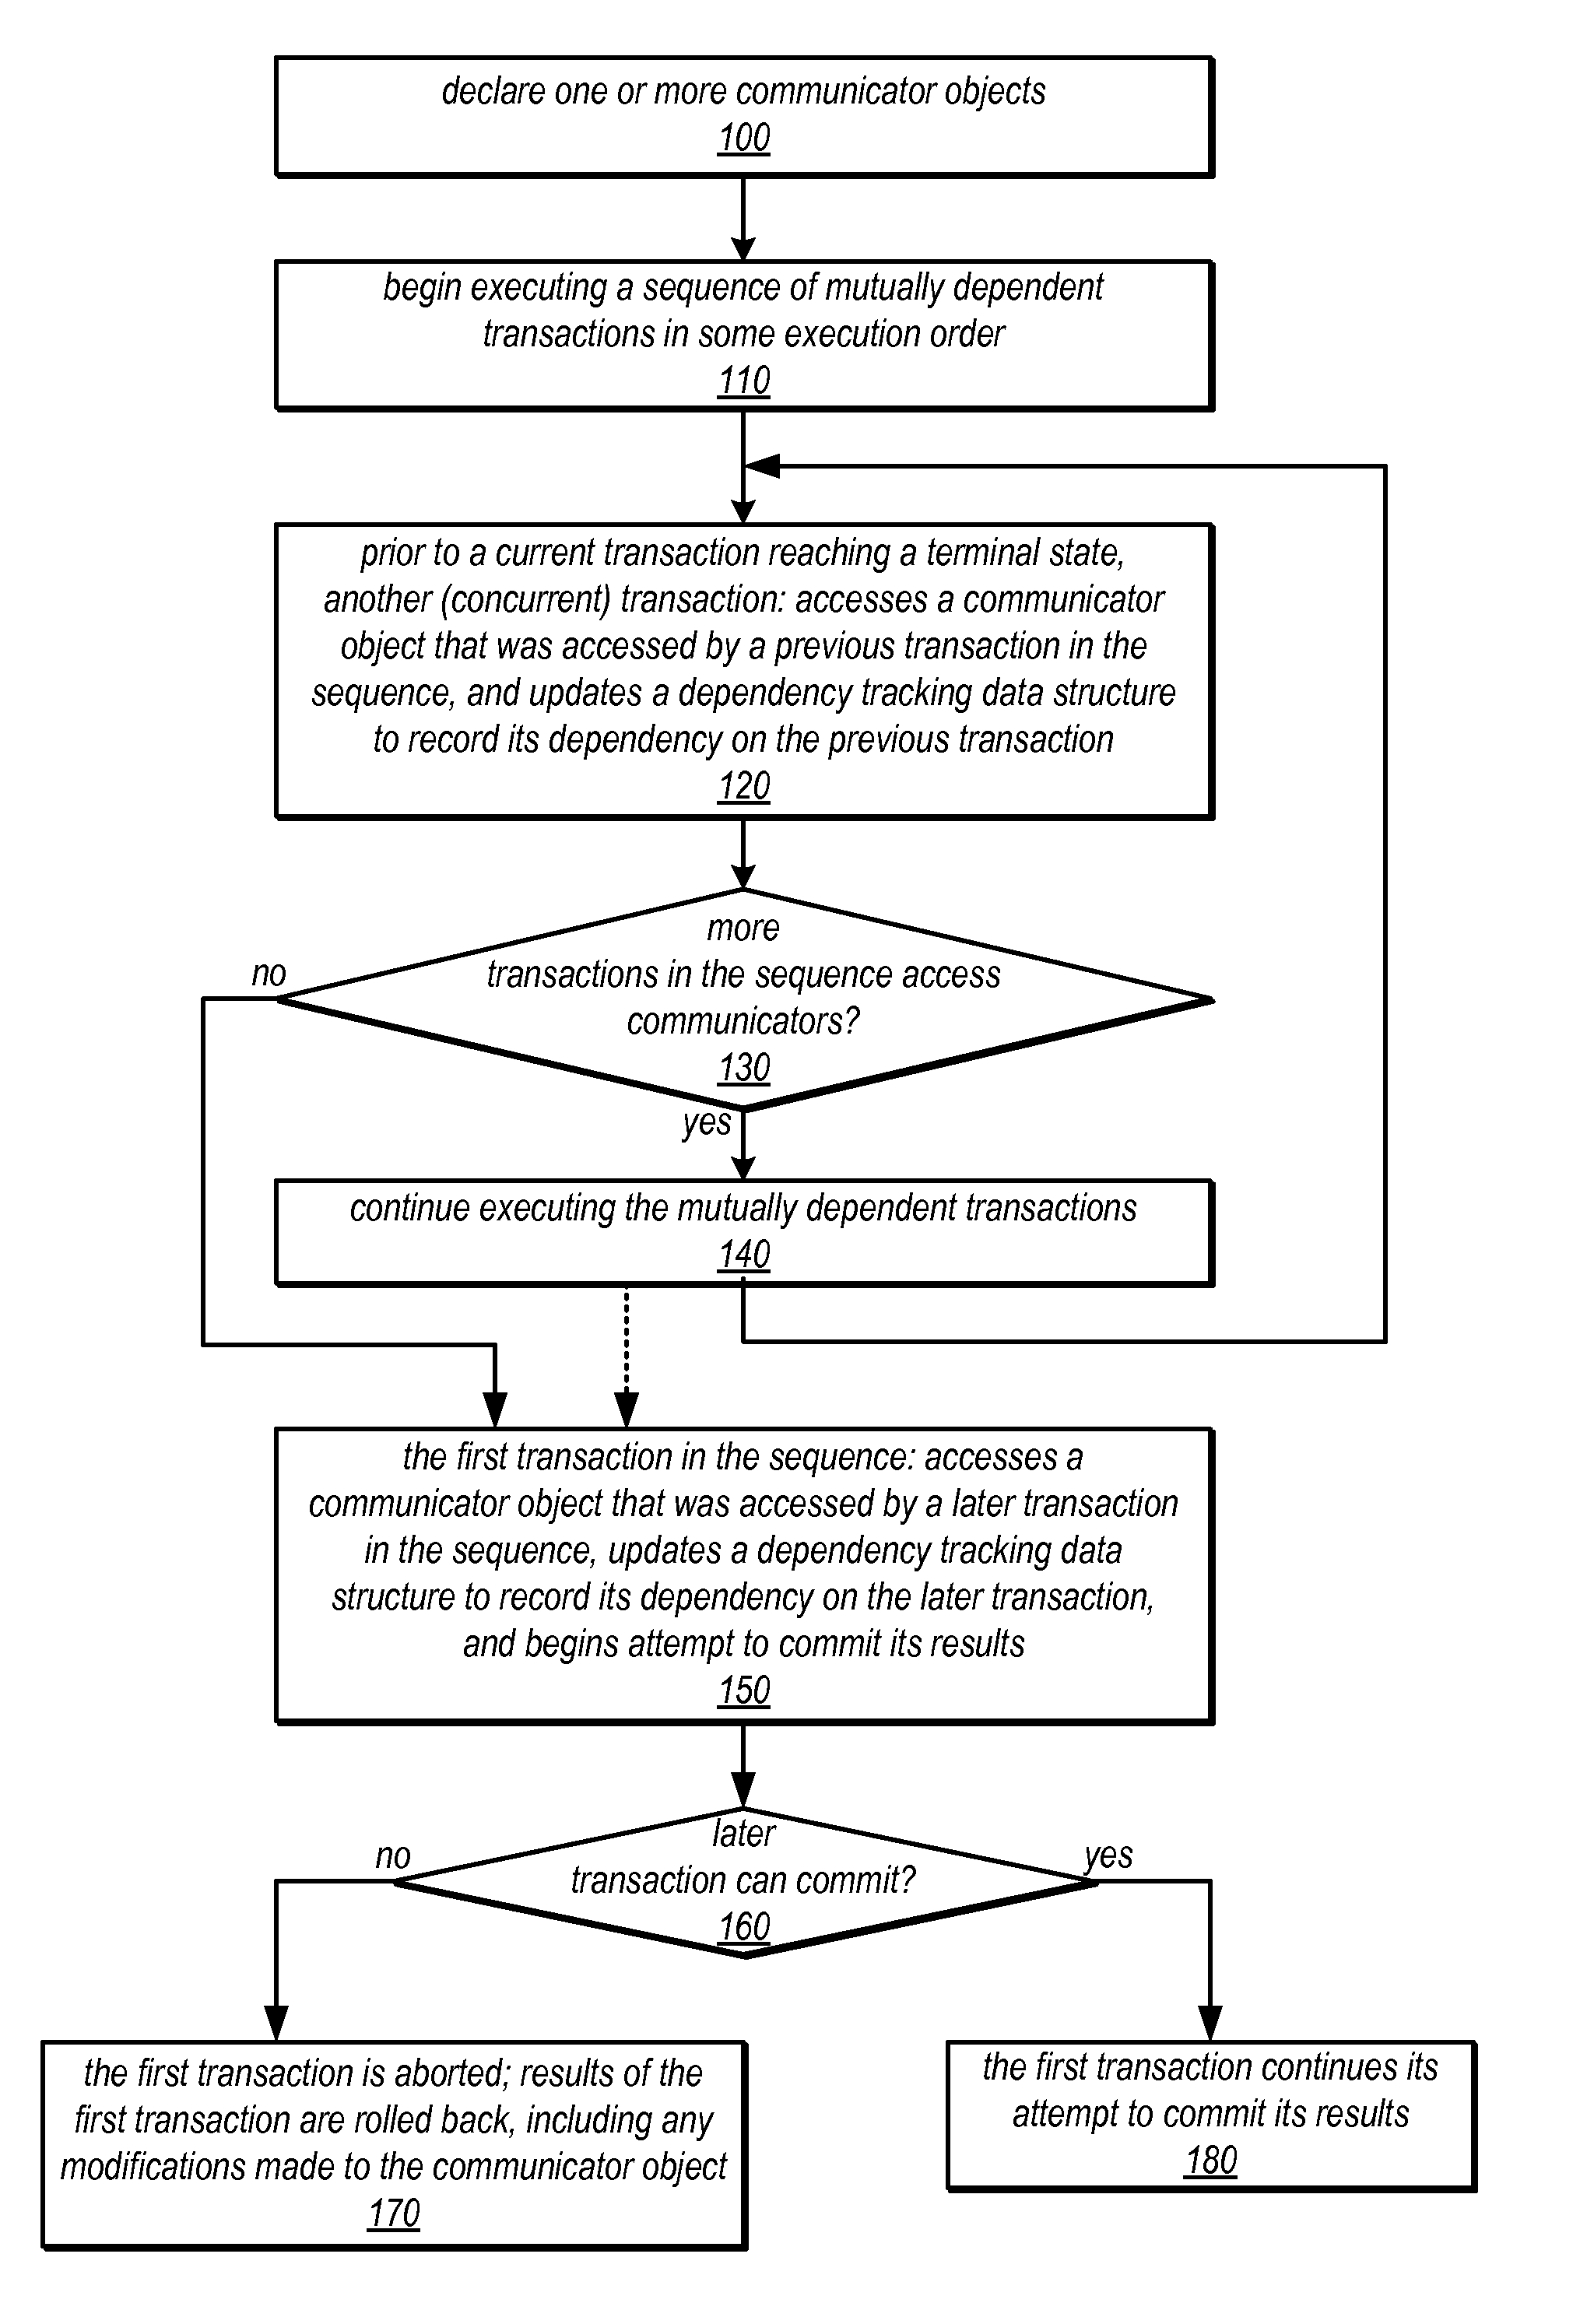 System and Method for Communication Between Concurrent Transactions Using Transaction Communicator Objects